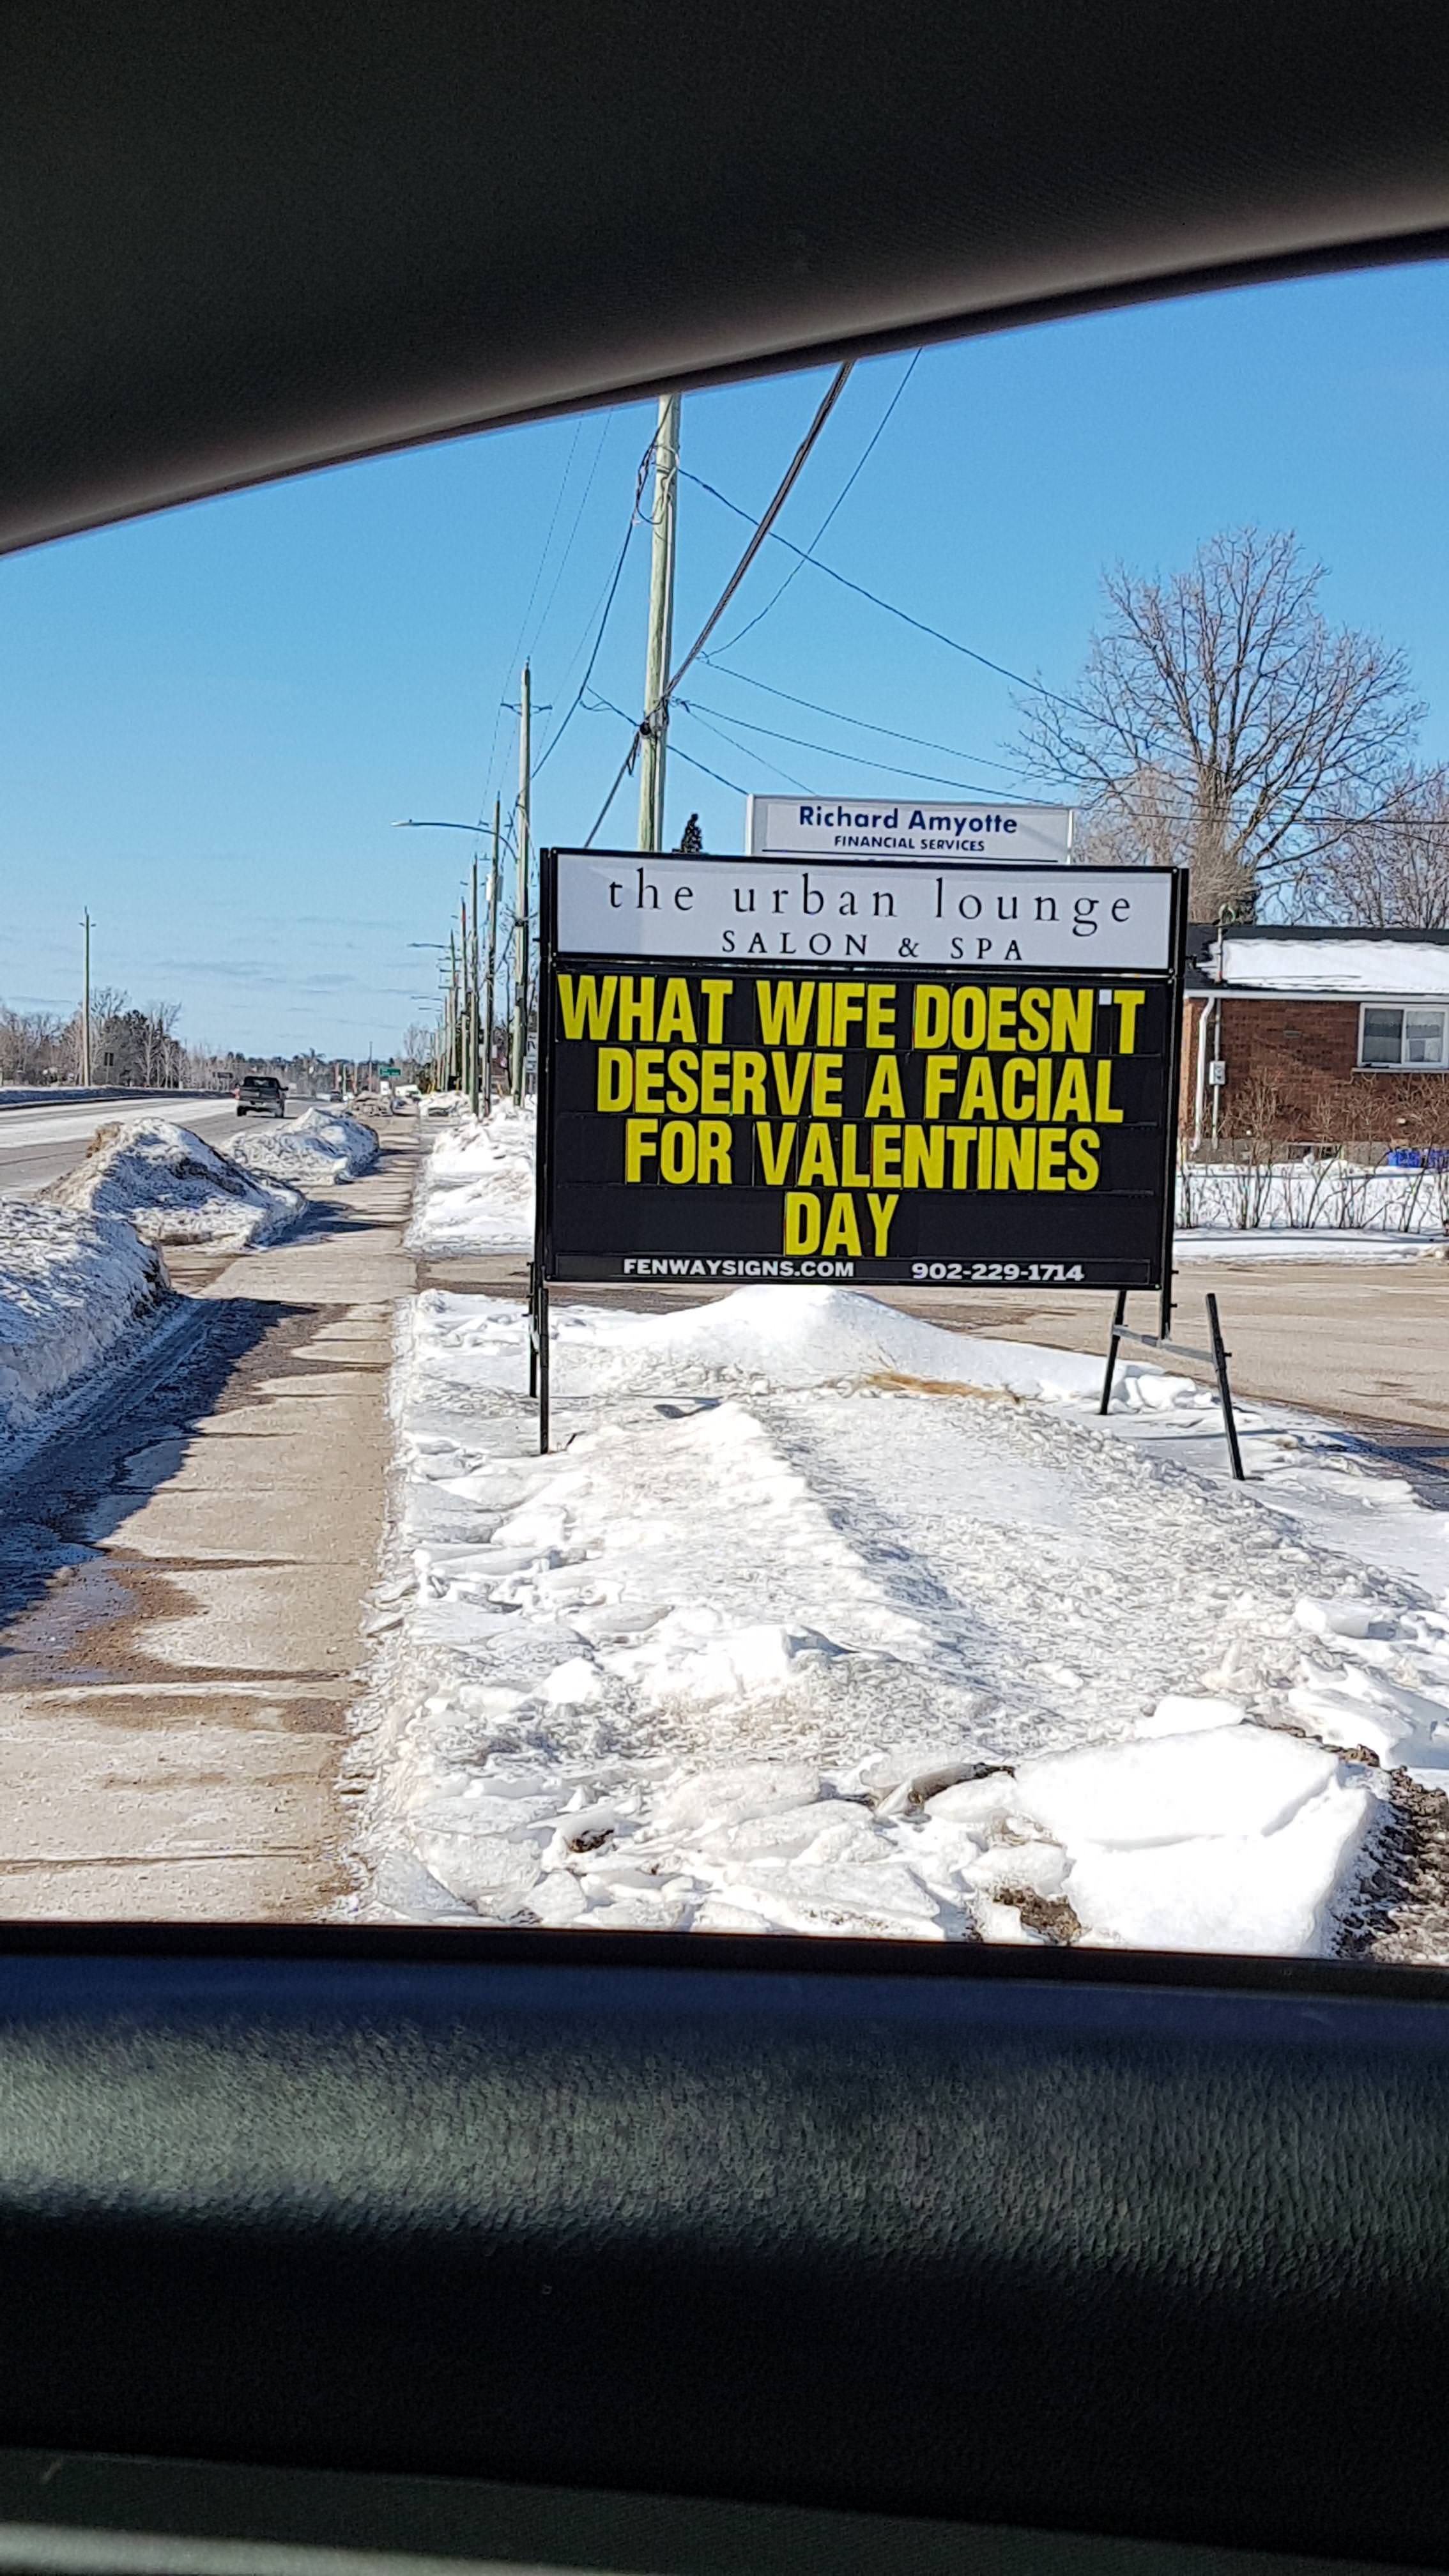 So a local business put this sign up for Valentines Day...